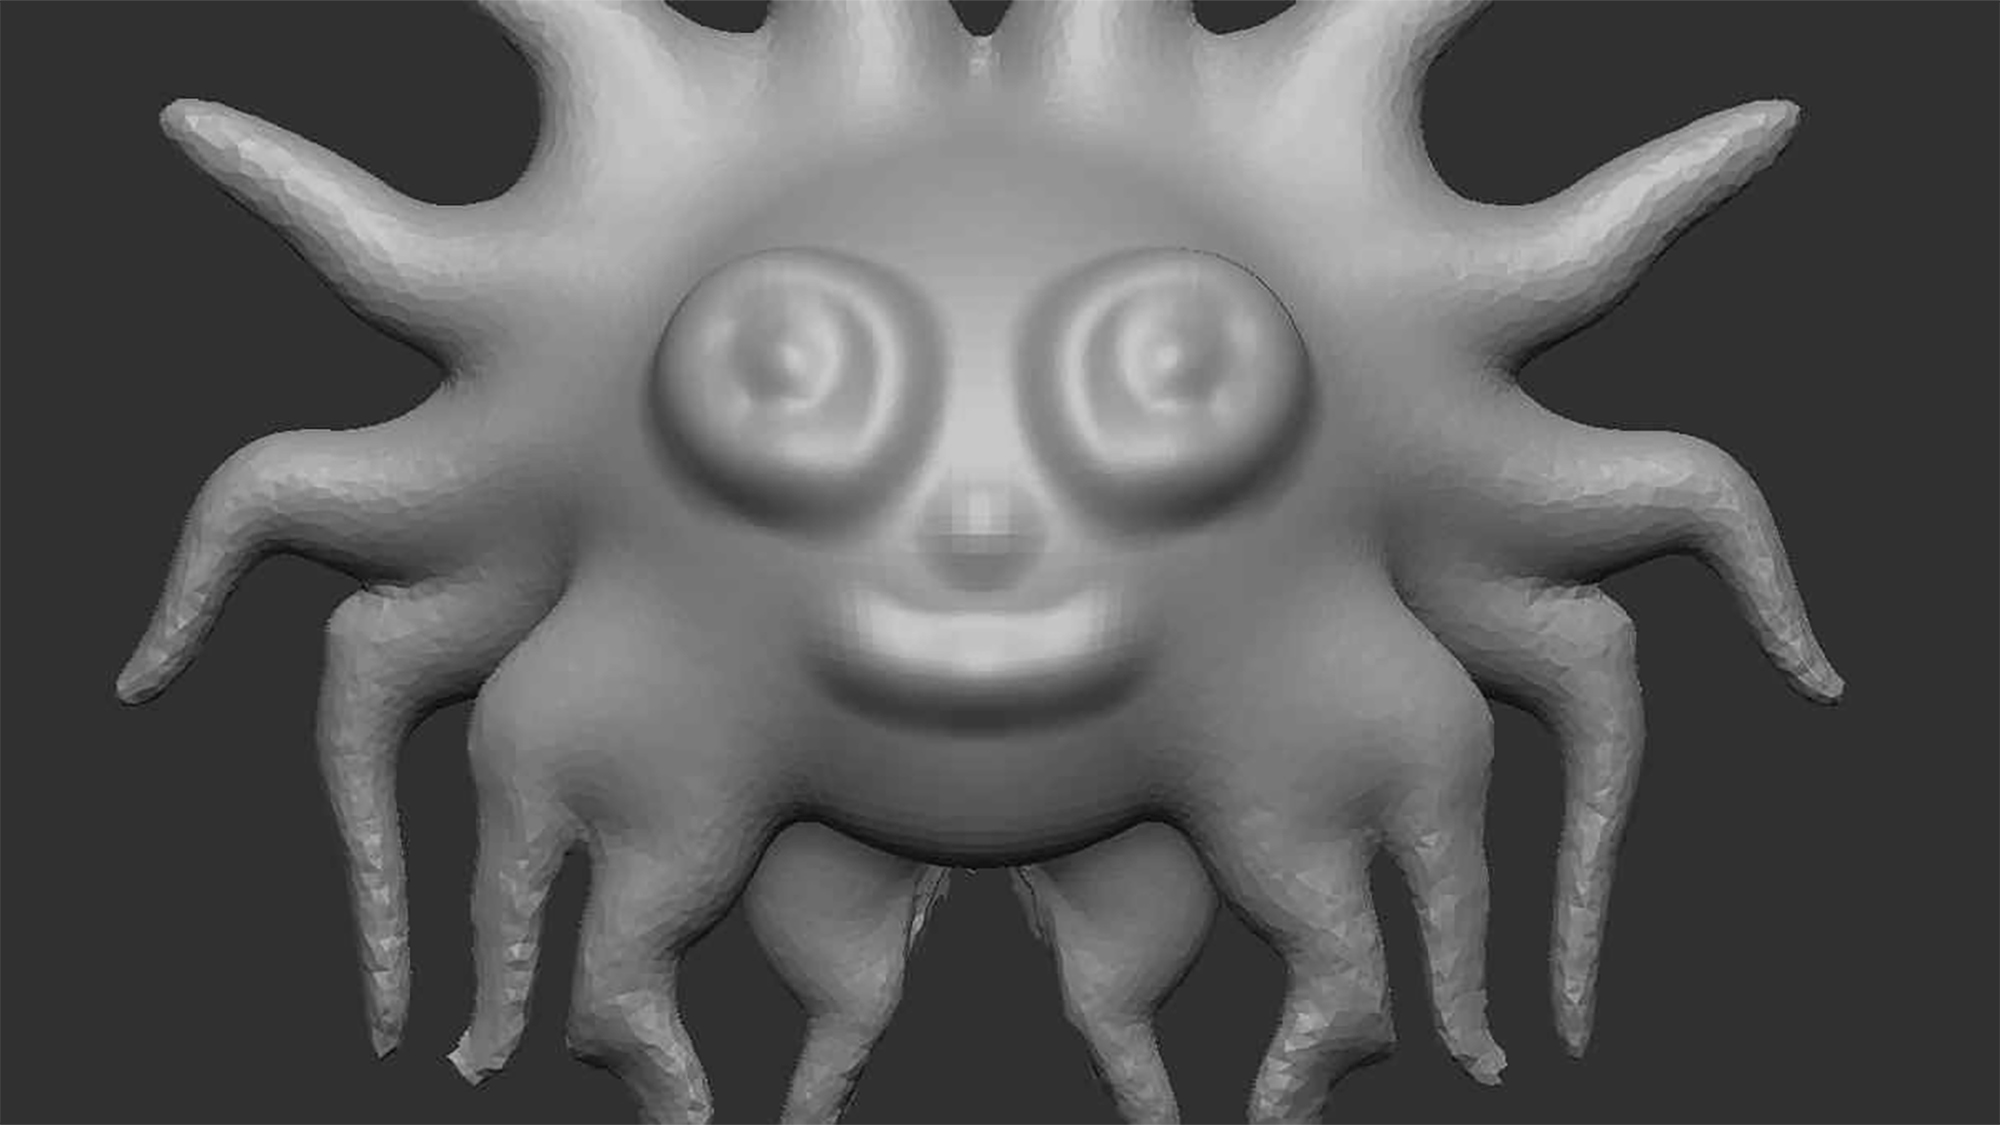 A 3D rendering of a fantasy creature is smiling. The tentacles around the friendly face make it resemble an illustration of the sun.